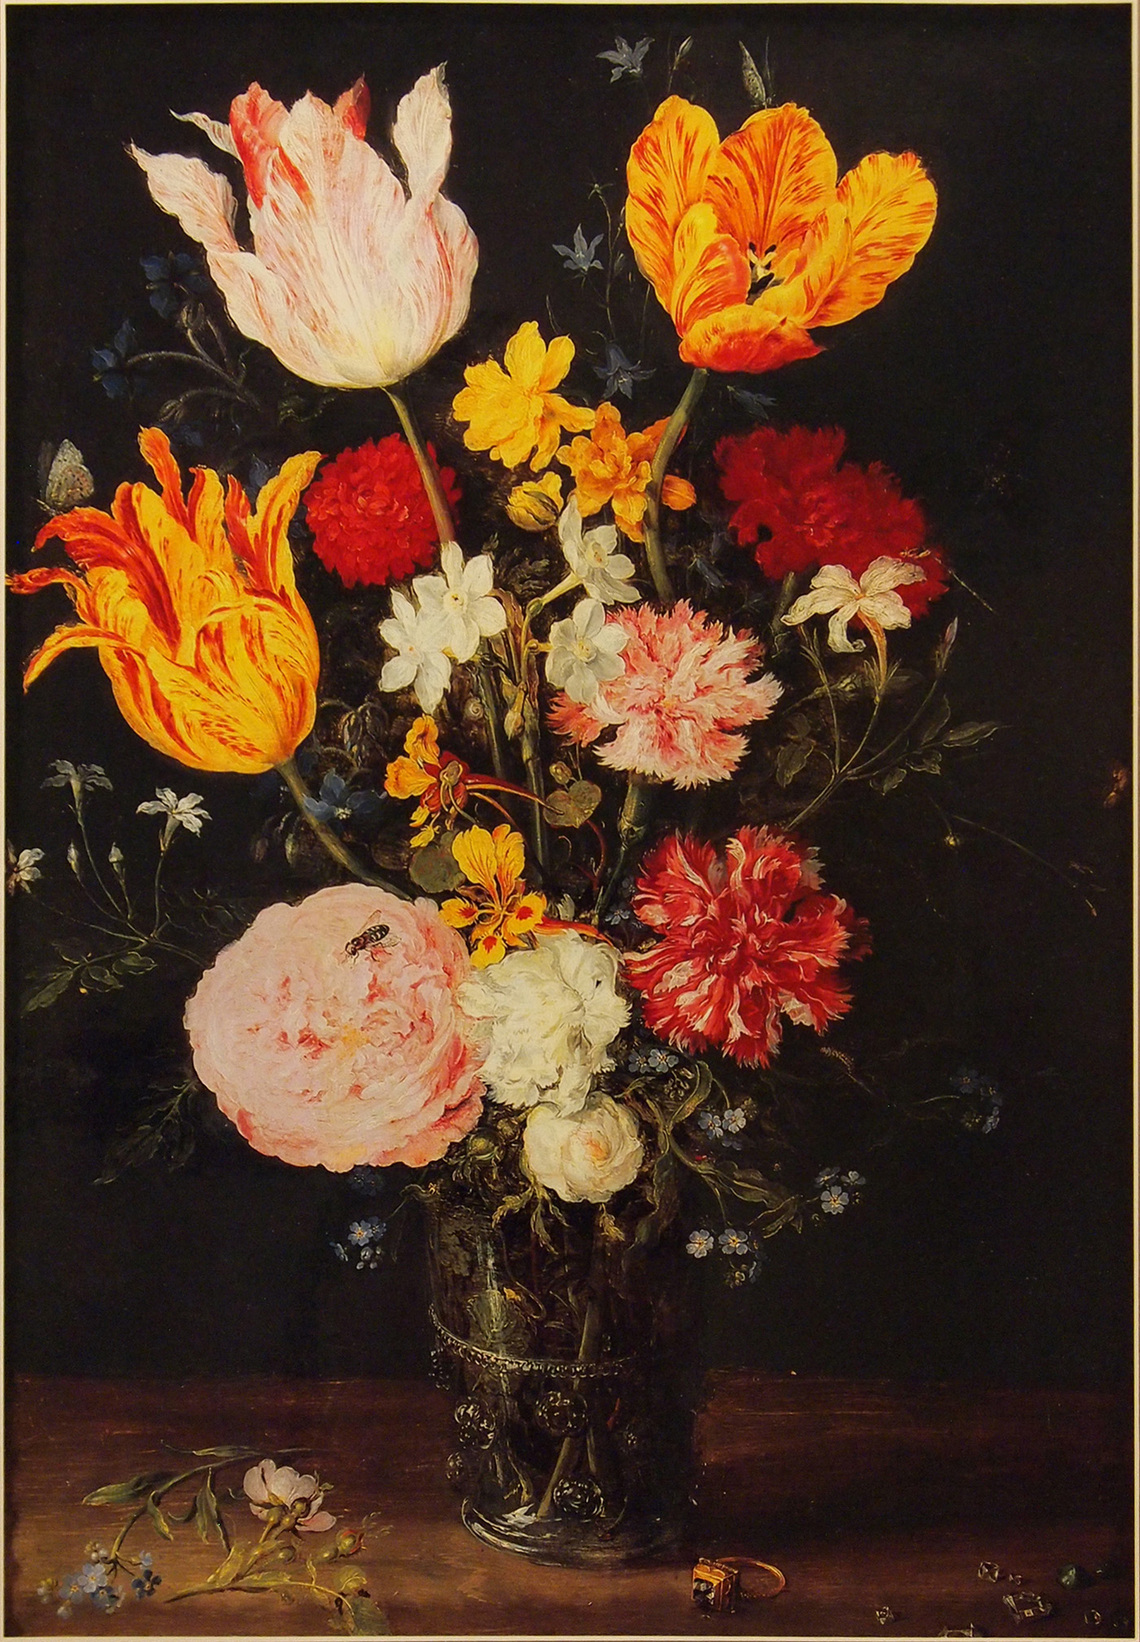 Flowers in a Glass Vase (Madrid)